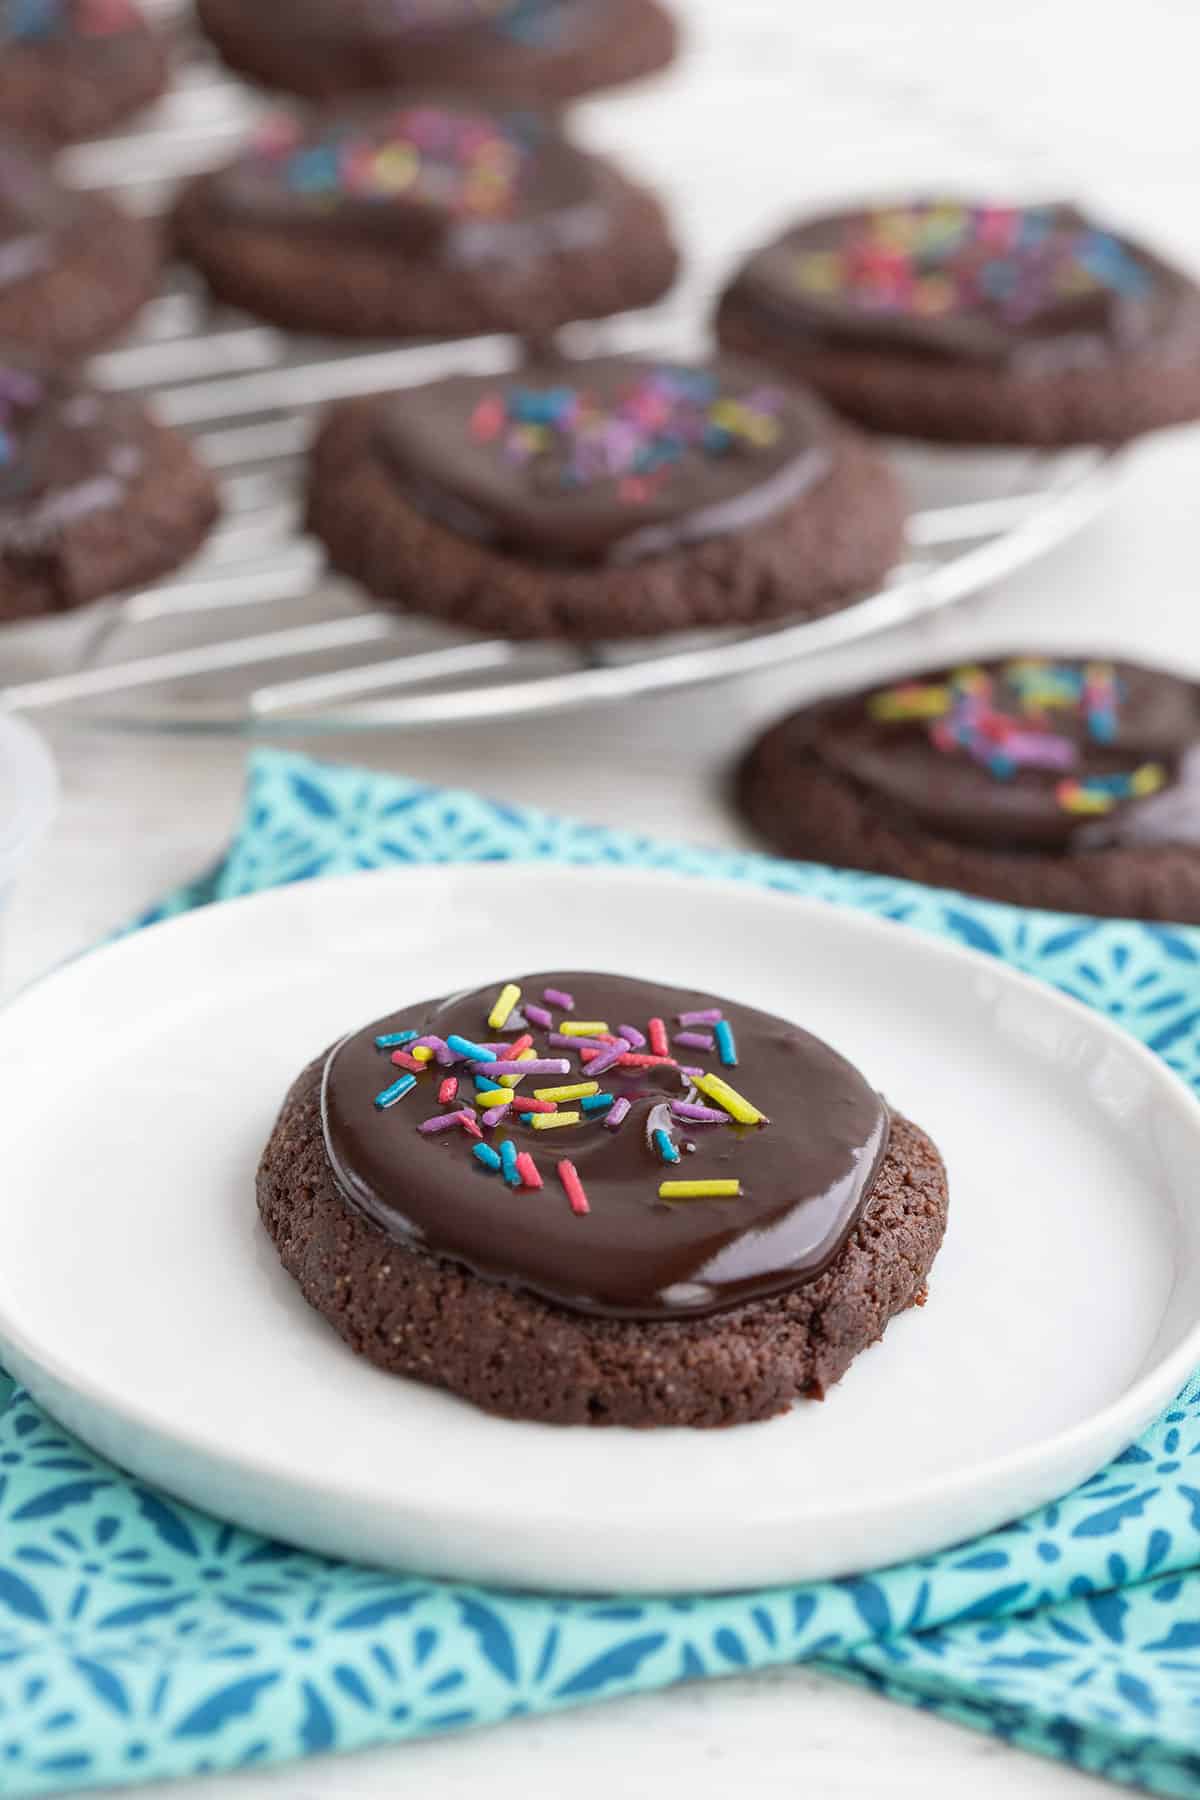 A keto chocolate cookie with glaze and sprinkles sits on a white plate in front of more cookies on a cooling rack.